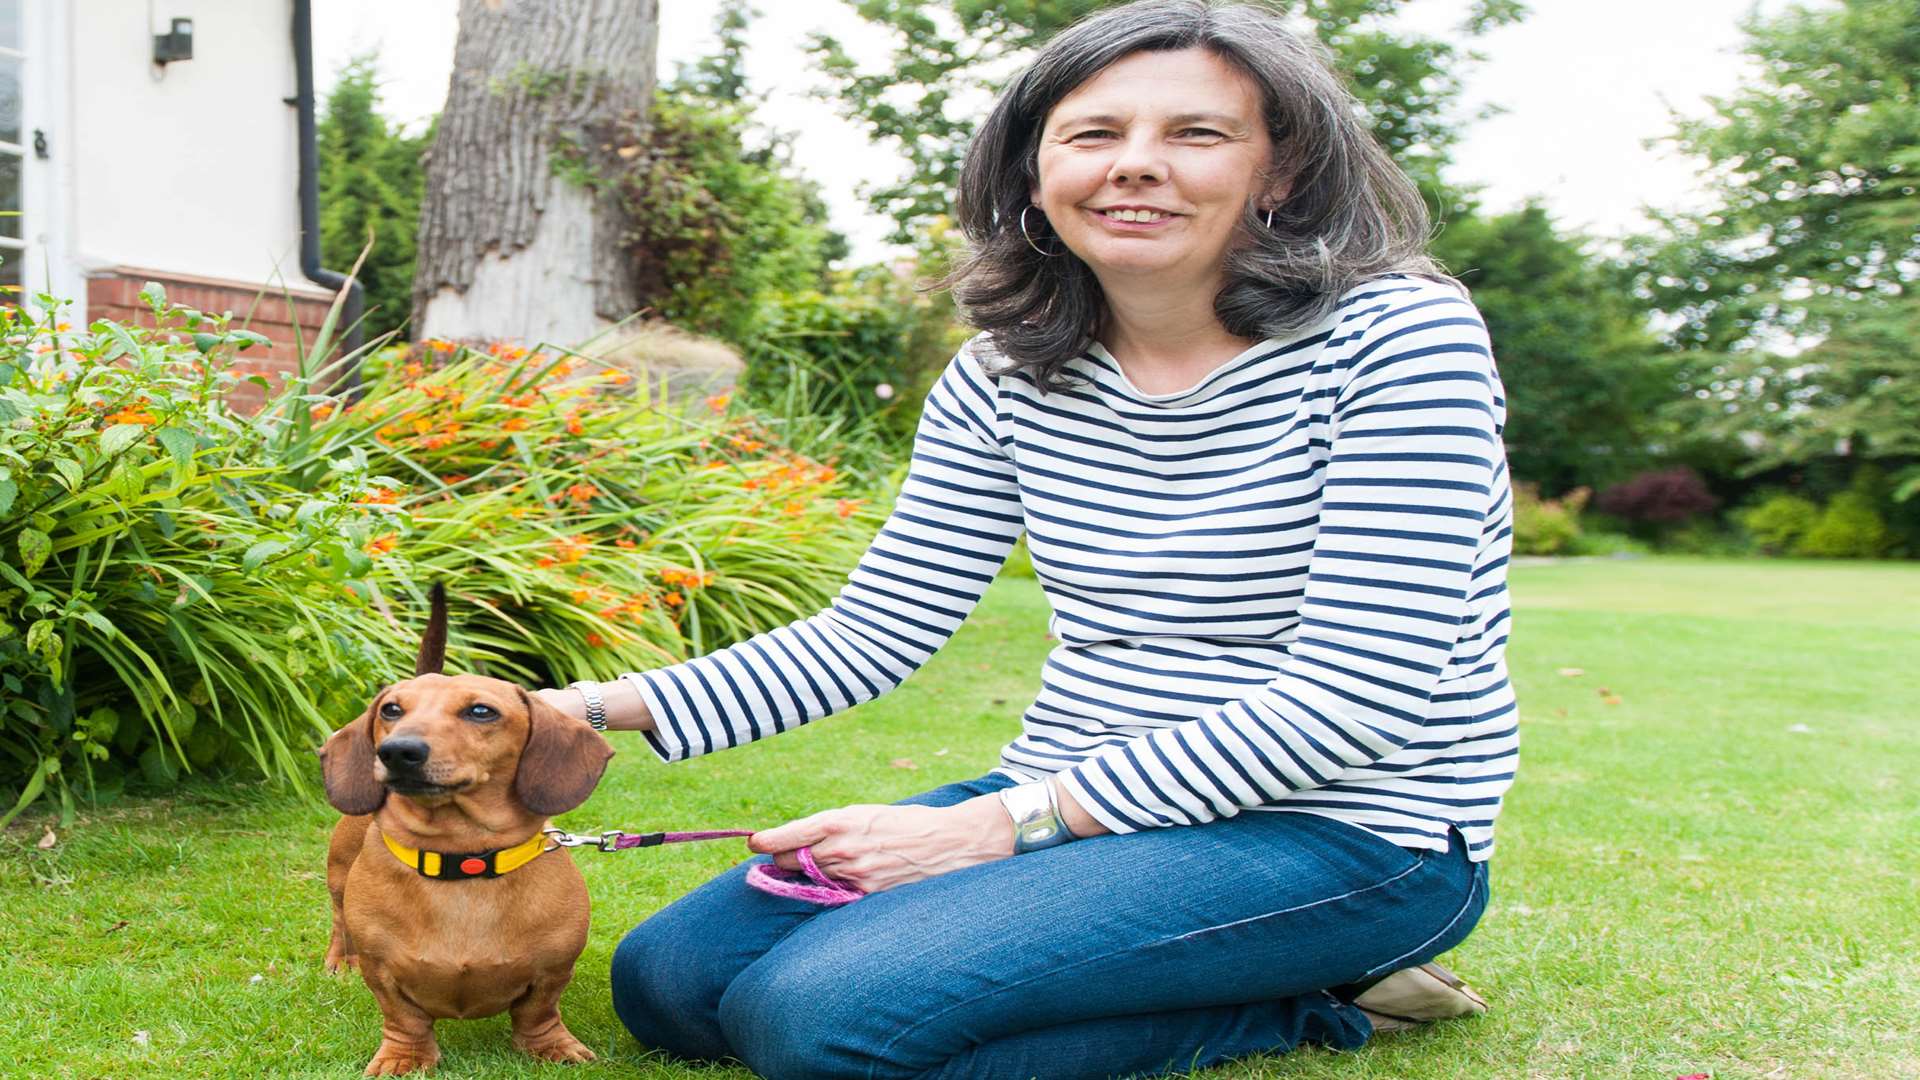 Helen Bailey with her dachshund Boris Picture: SWNS